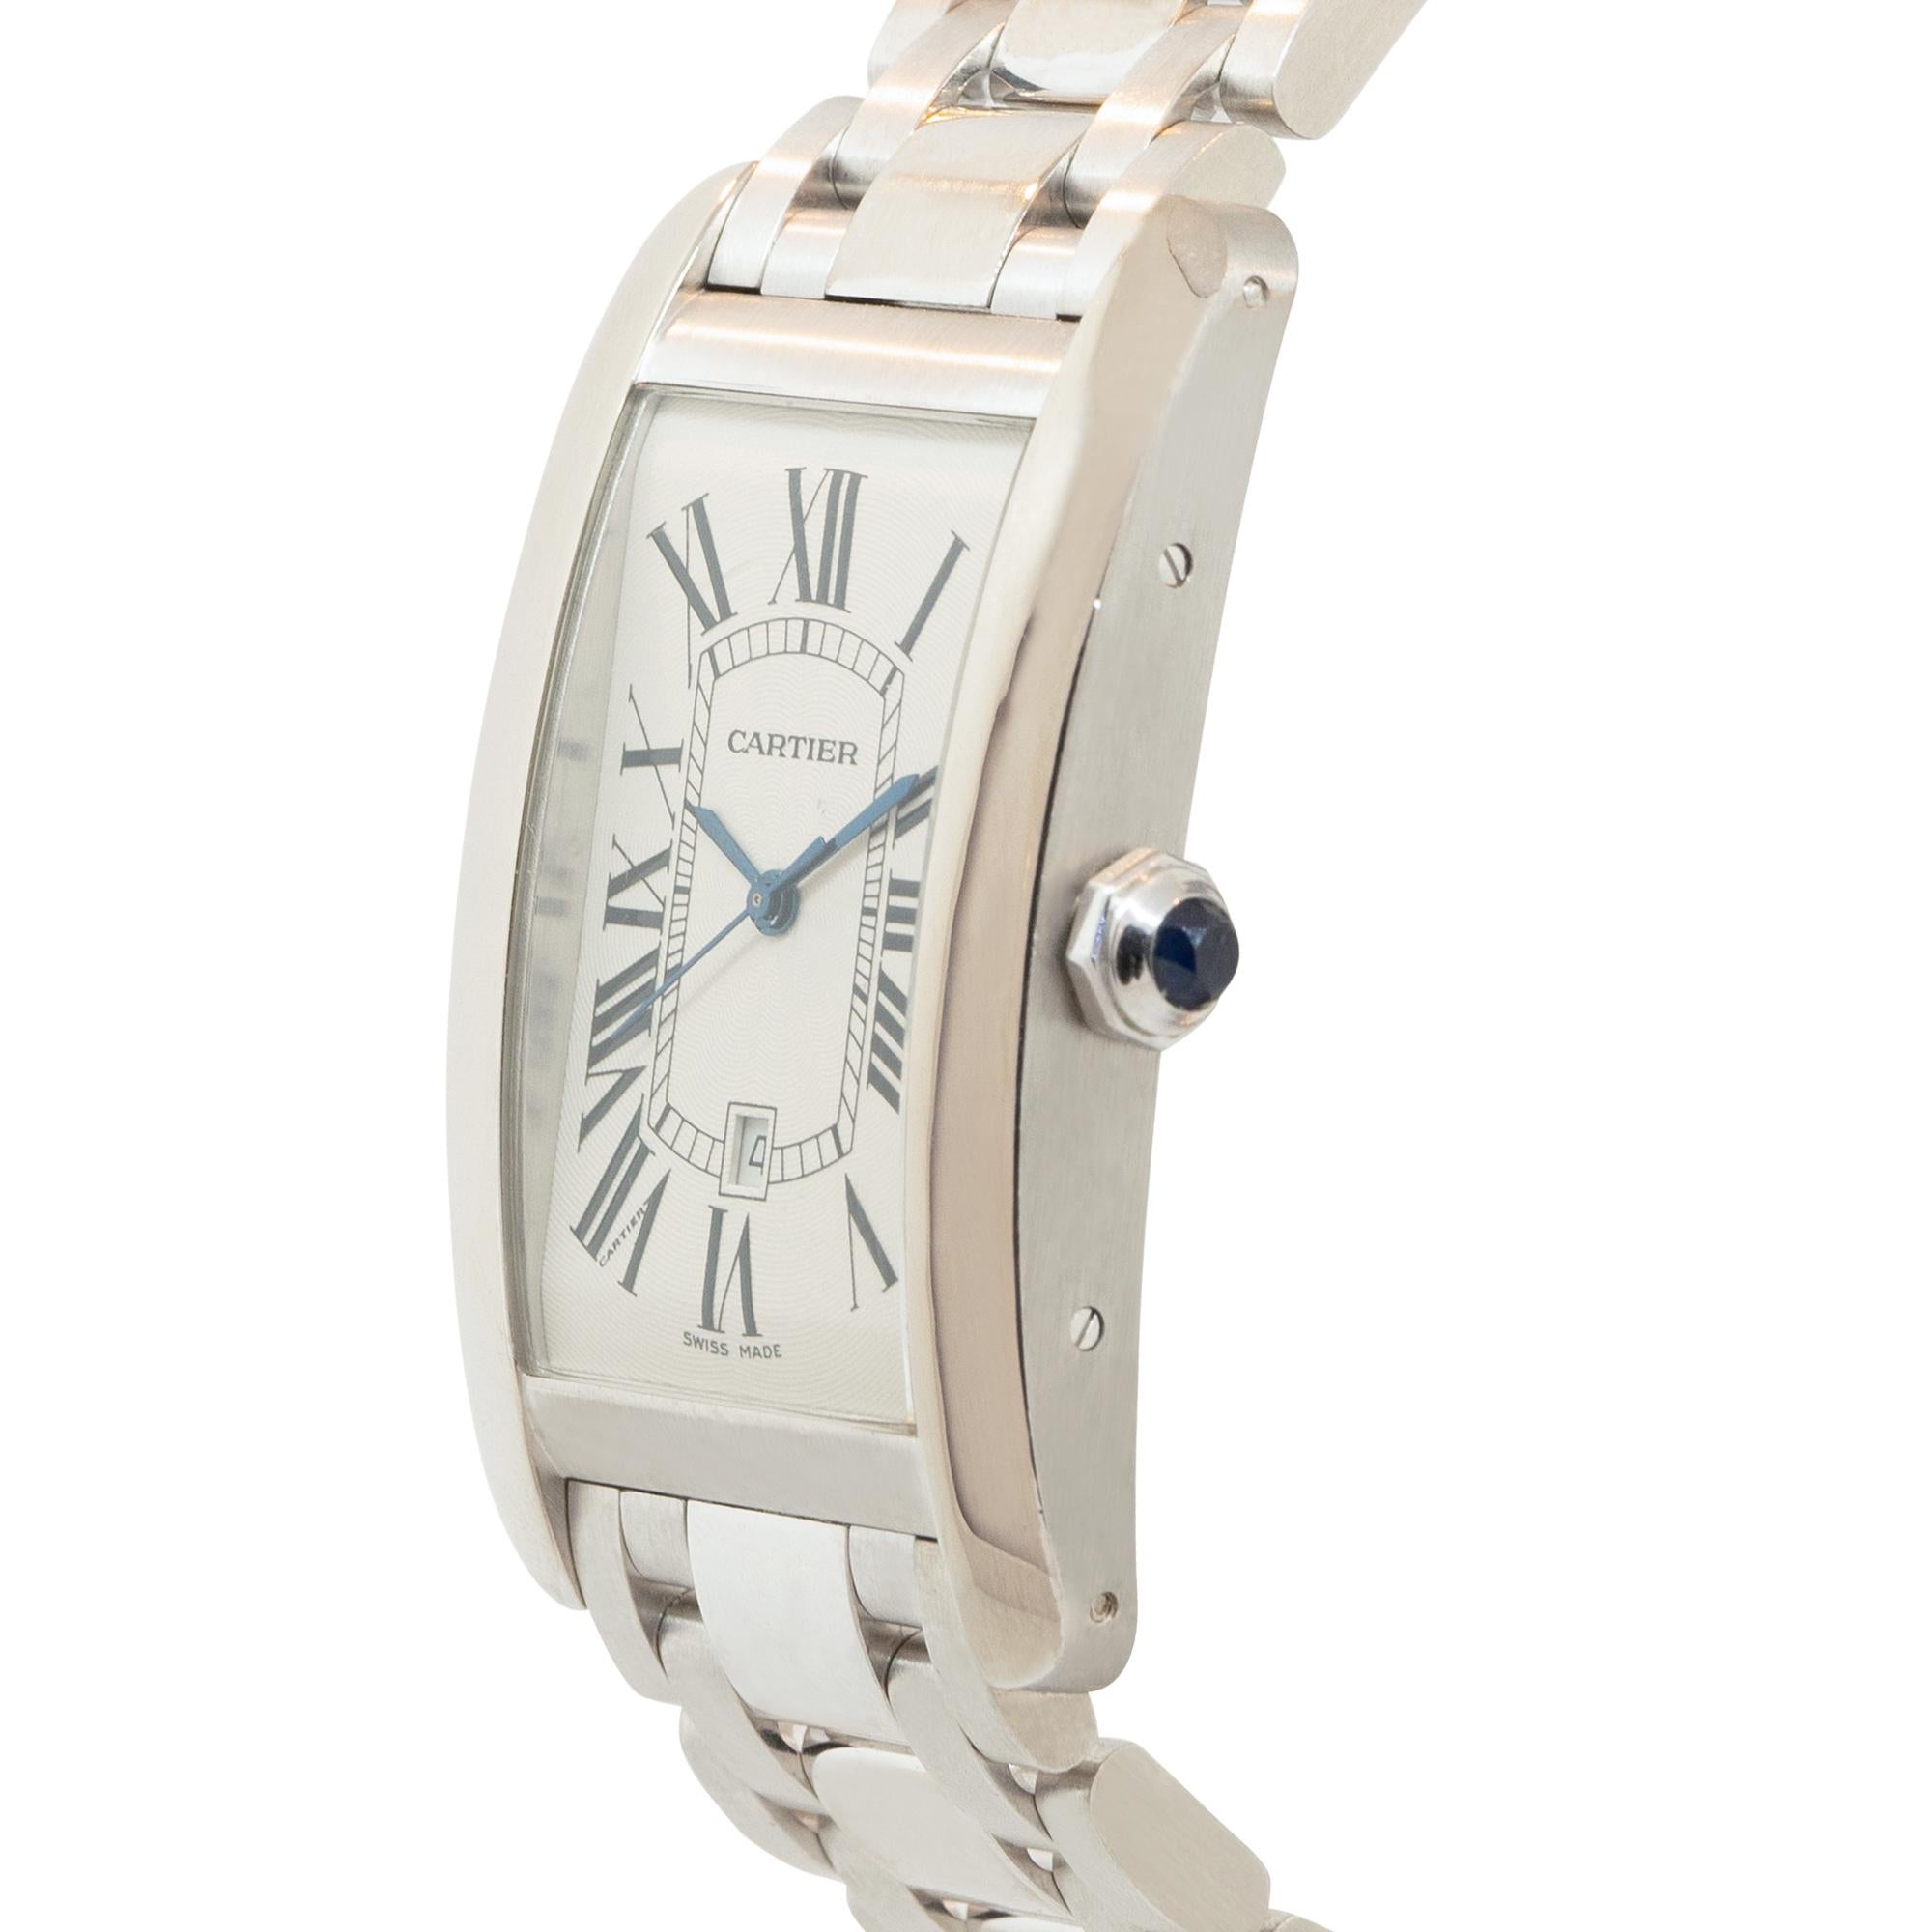 Brand: Cartier
Model: Tank
Case Material: 18k White Gold
Case Size: Large Men's Size
Dial: White Concentric Dial with Black Roman Numerals
Bezel: White Gold Fixed Bezel
Bracelet: White Gold Bracelet
Movement: Automatic
Size: Will fit a large